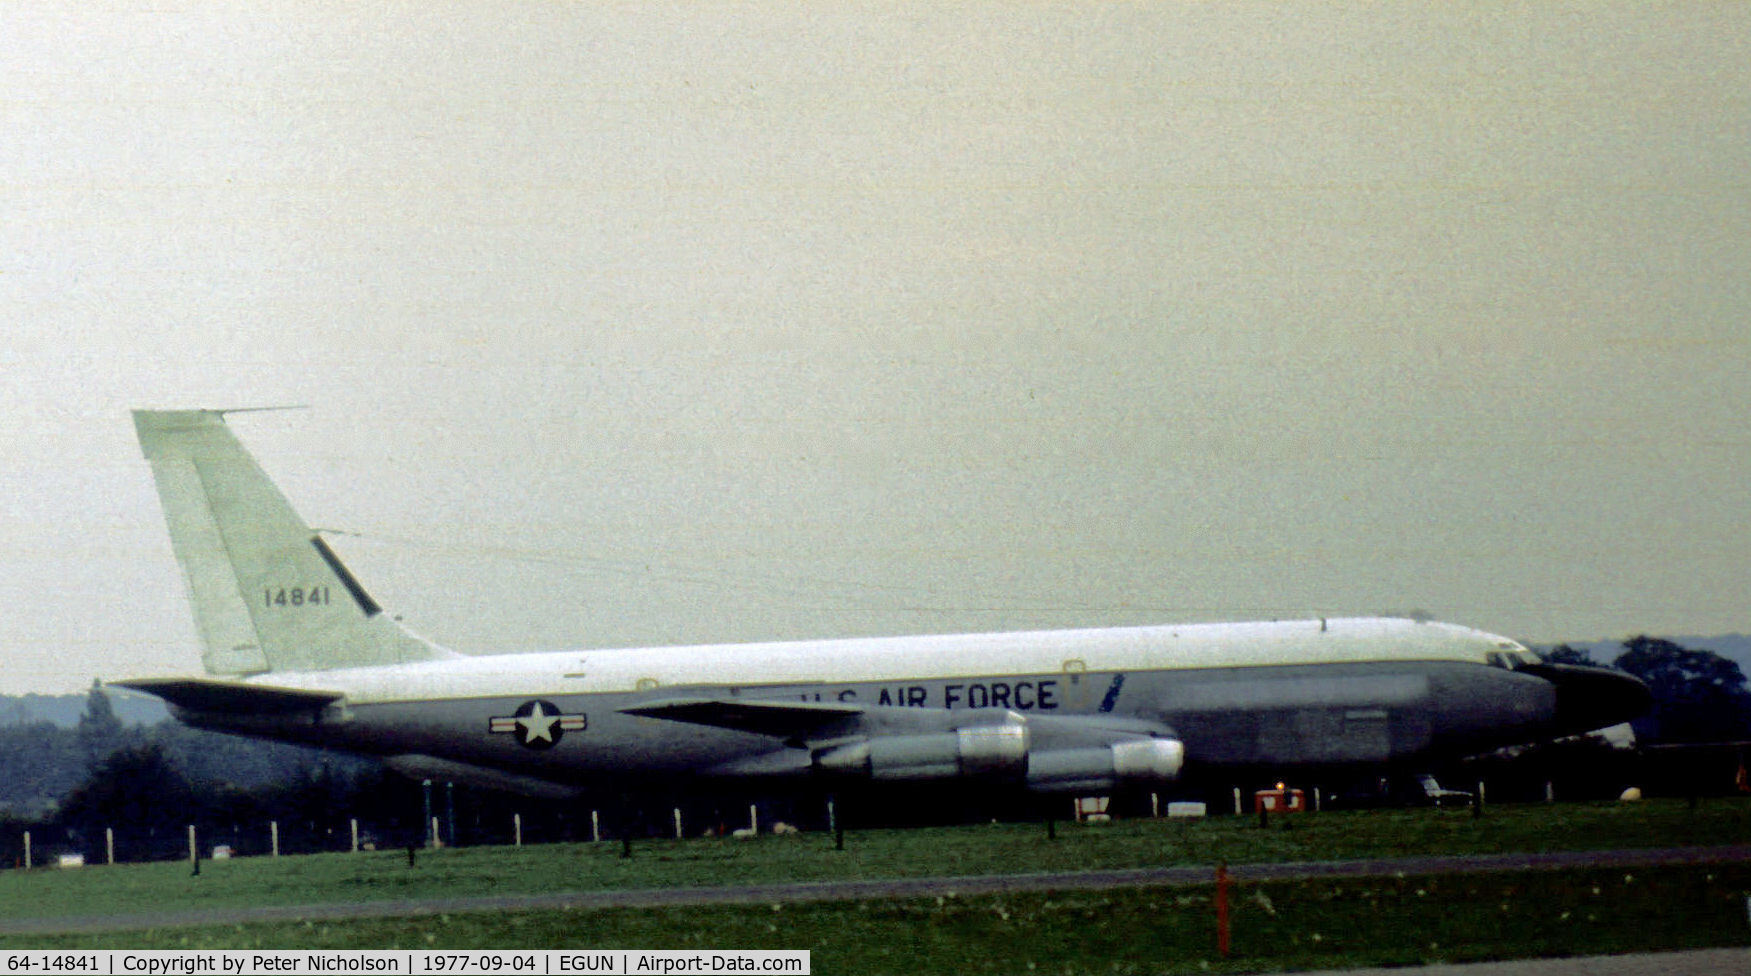 64-14841, 1964 Boeing RC-135V Rivet Joint C/N 18781, This RC-135V Rivet Joint of 55th Strategic Reconnaissance Wing at Offutt AFB was seen at RAF Mildenhall in the Summer of 1977.